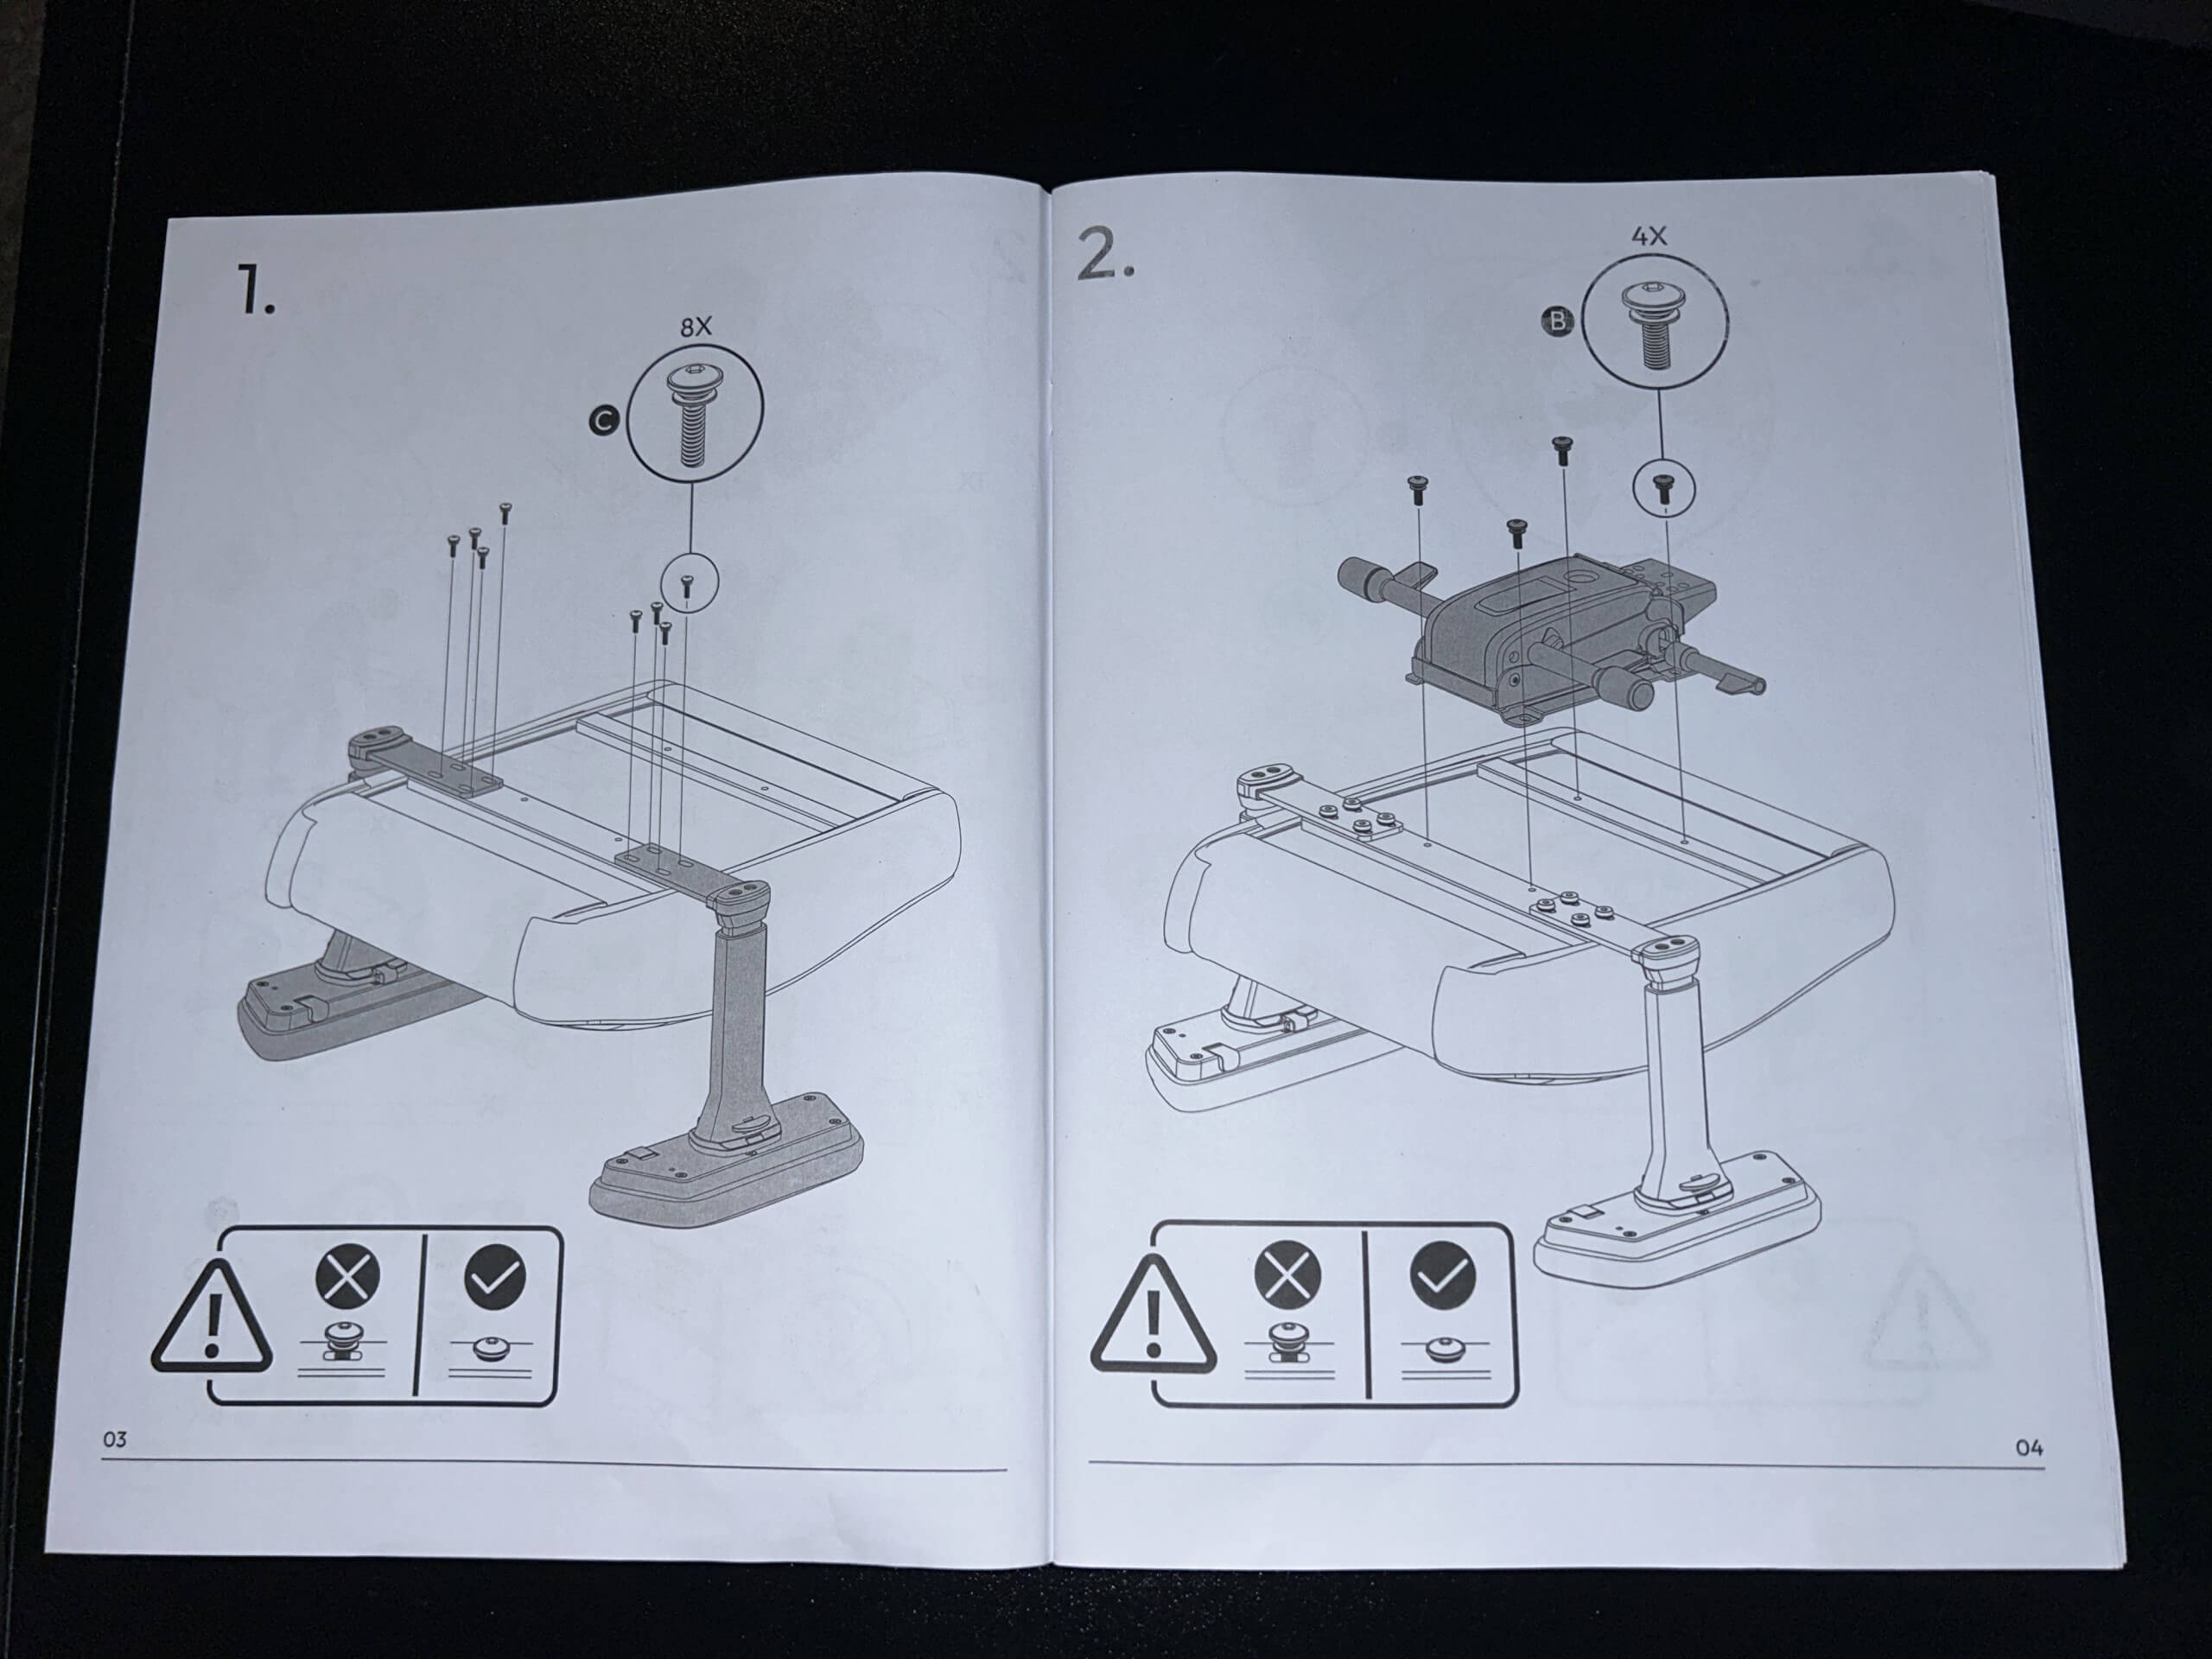 This photograph shows a picture of page 1 and 2 of the instruction manual. It shows two pictures that show the correct position of the screws to add the arm rests, as well as the mechanism under the chair. 